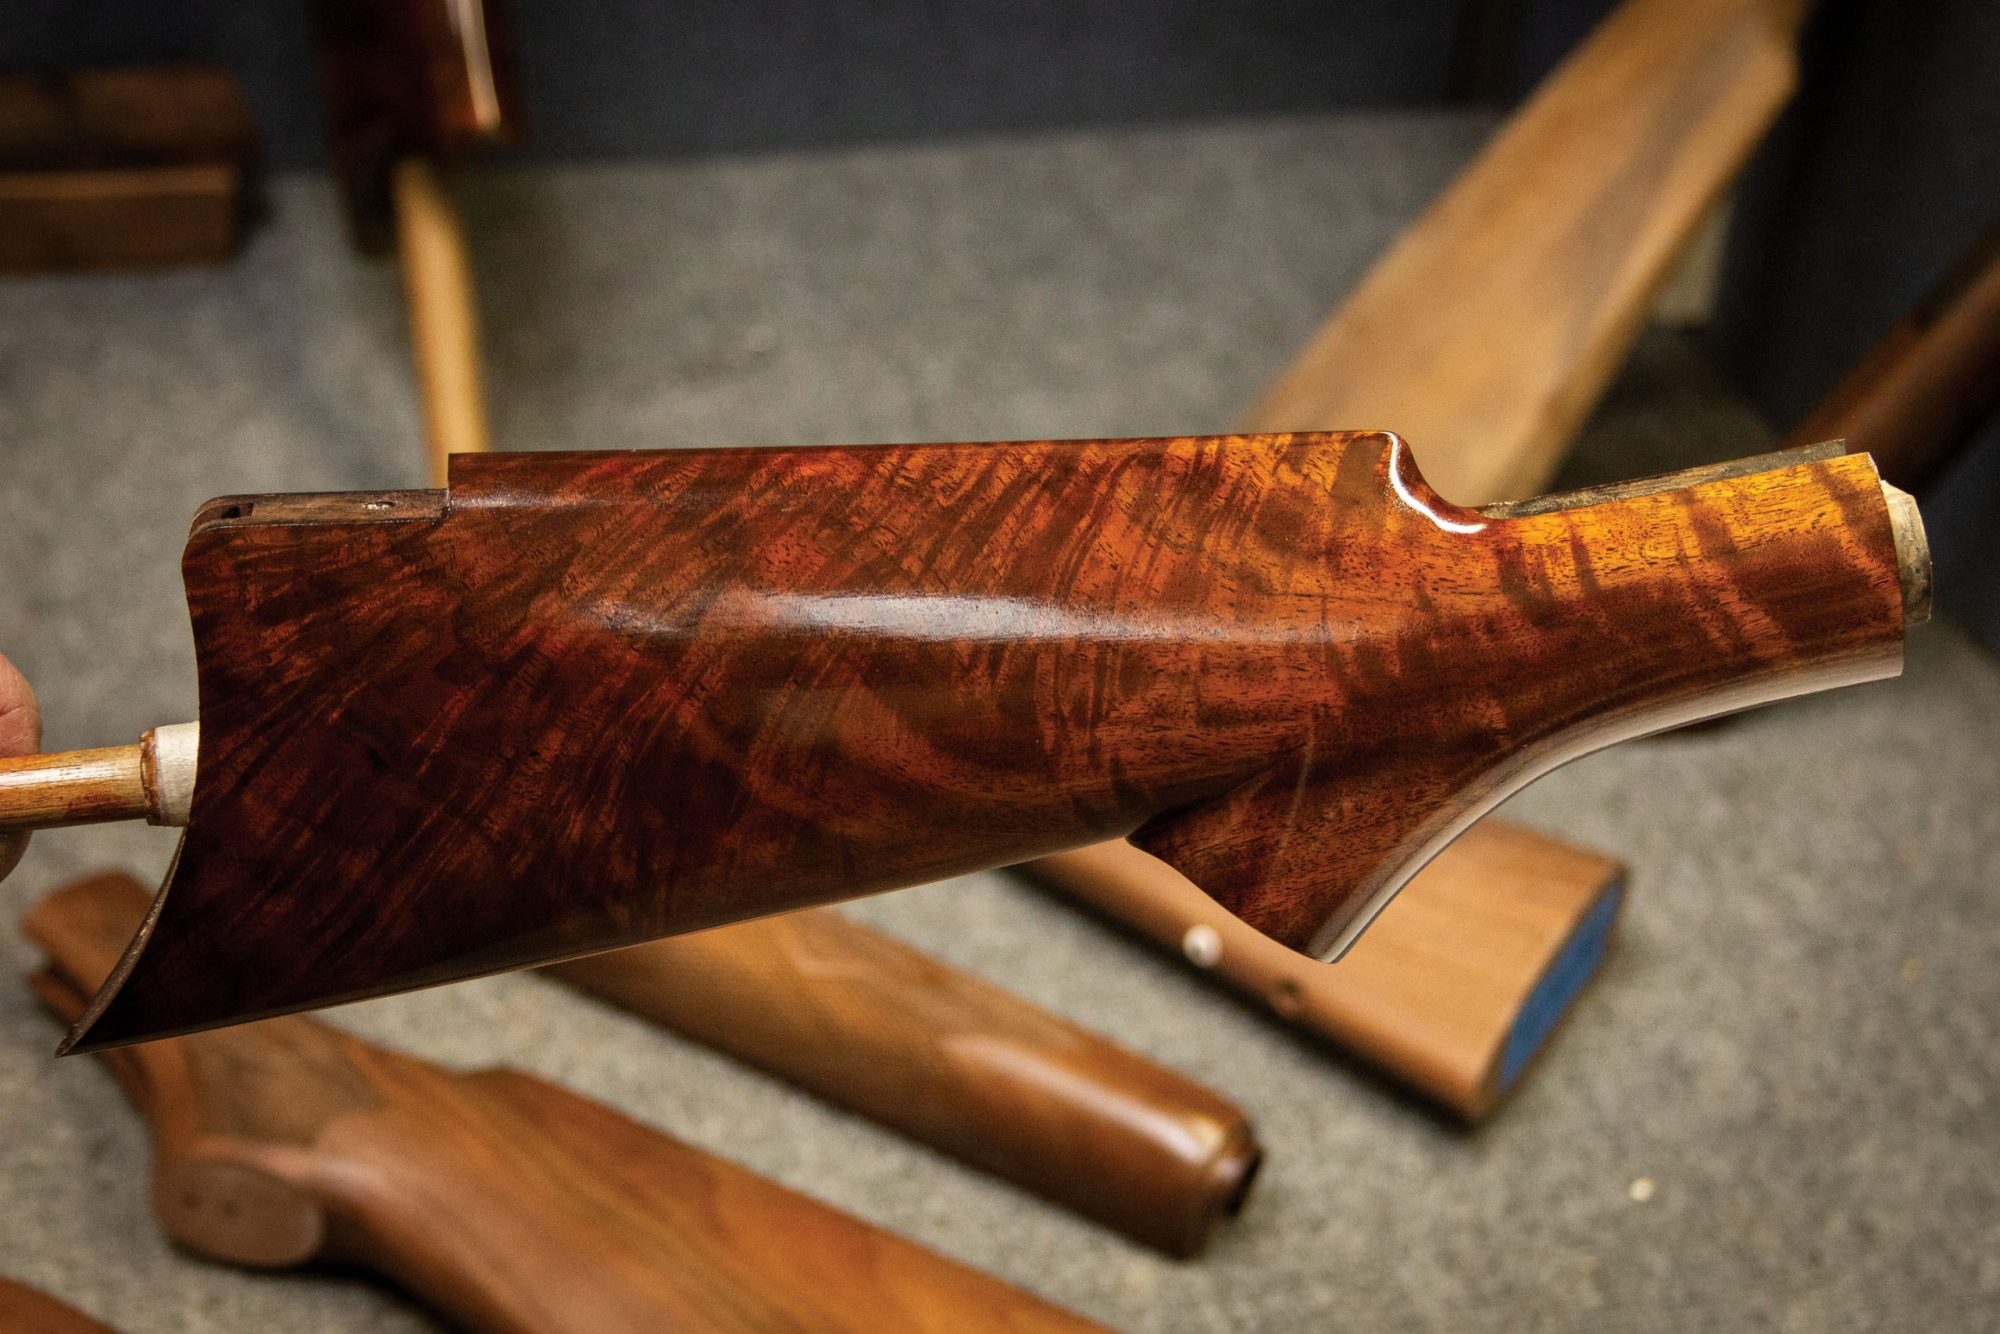 Photo of a Winchester 1873, during restoration work by Turnbull Restoration of Bloomfield, NY